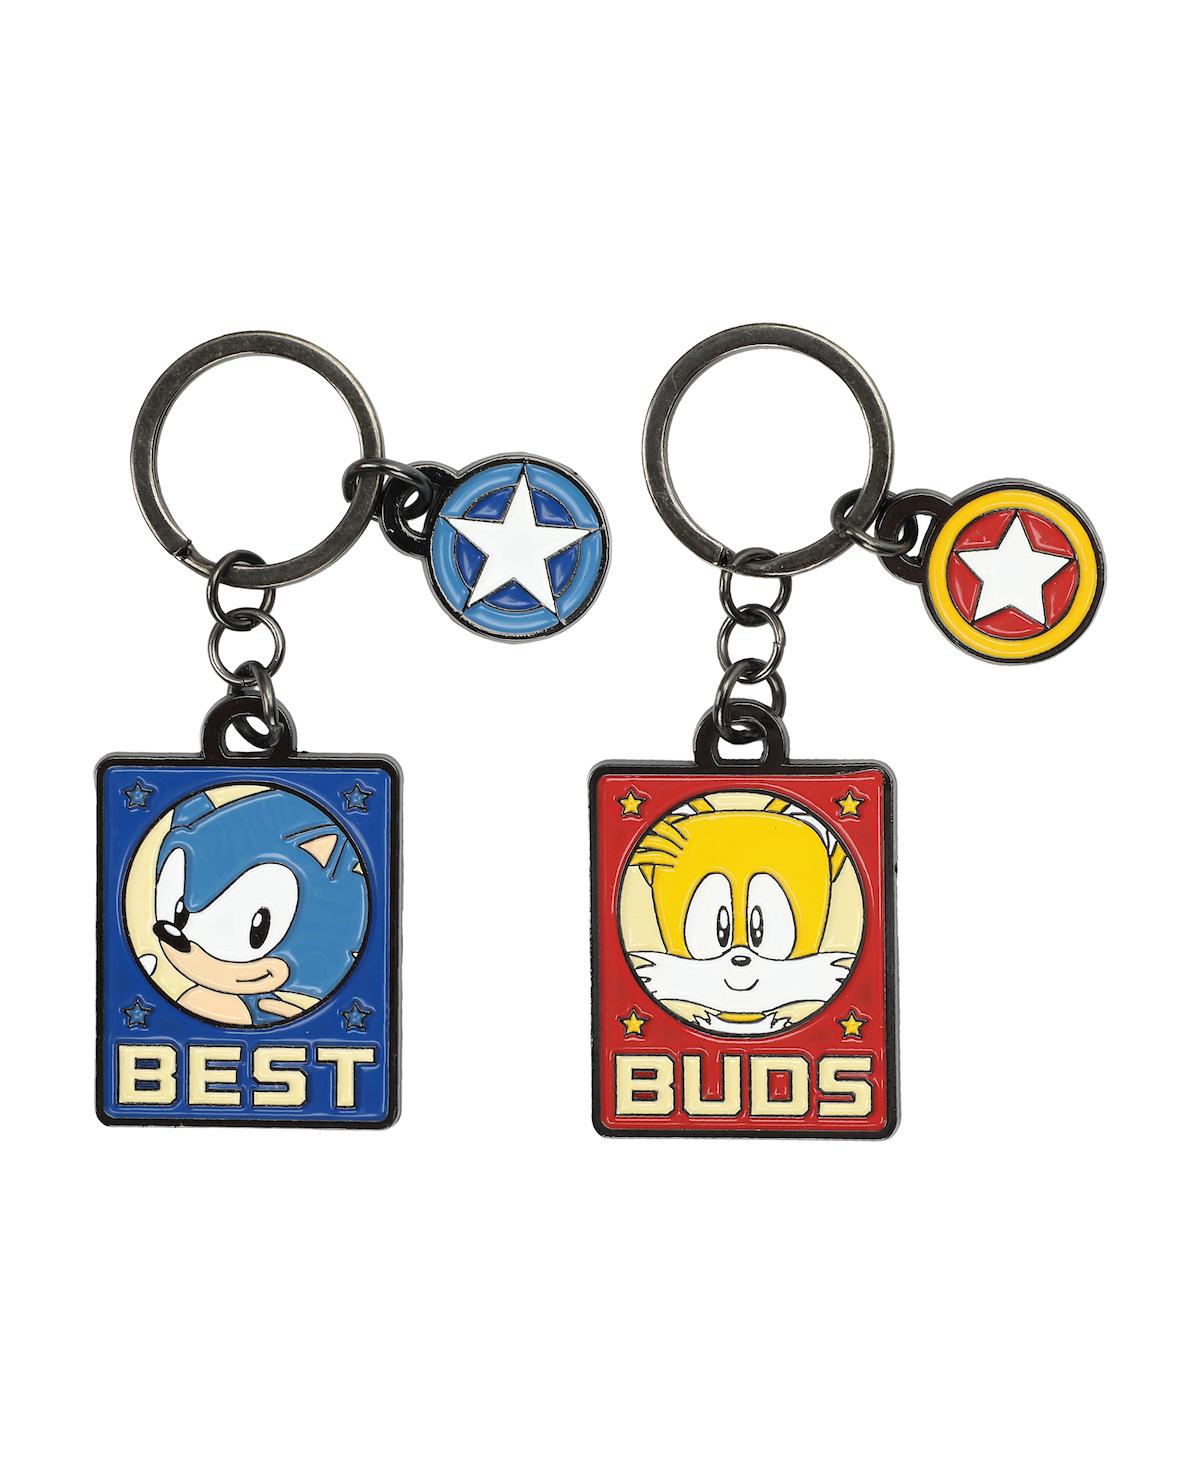 Sonic & Tails Best Buds Keychains (Set of 2) - Multicolored